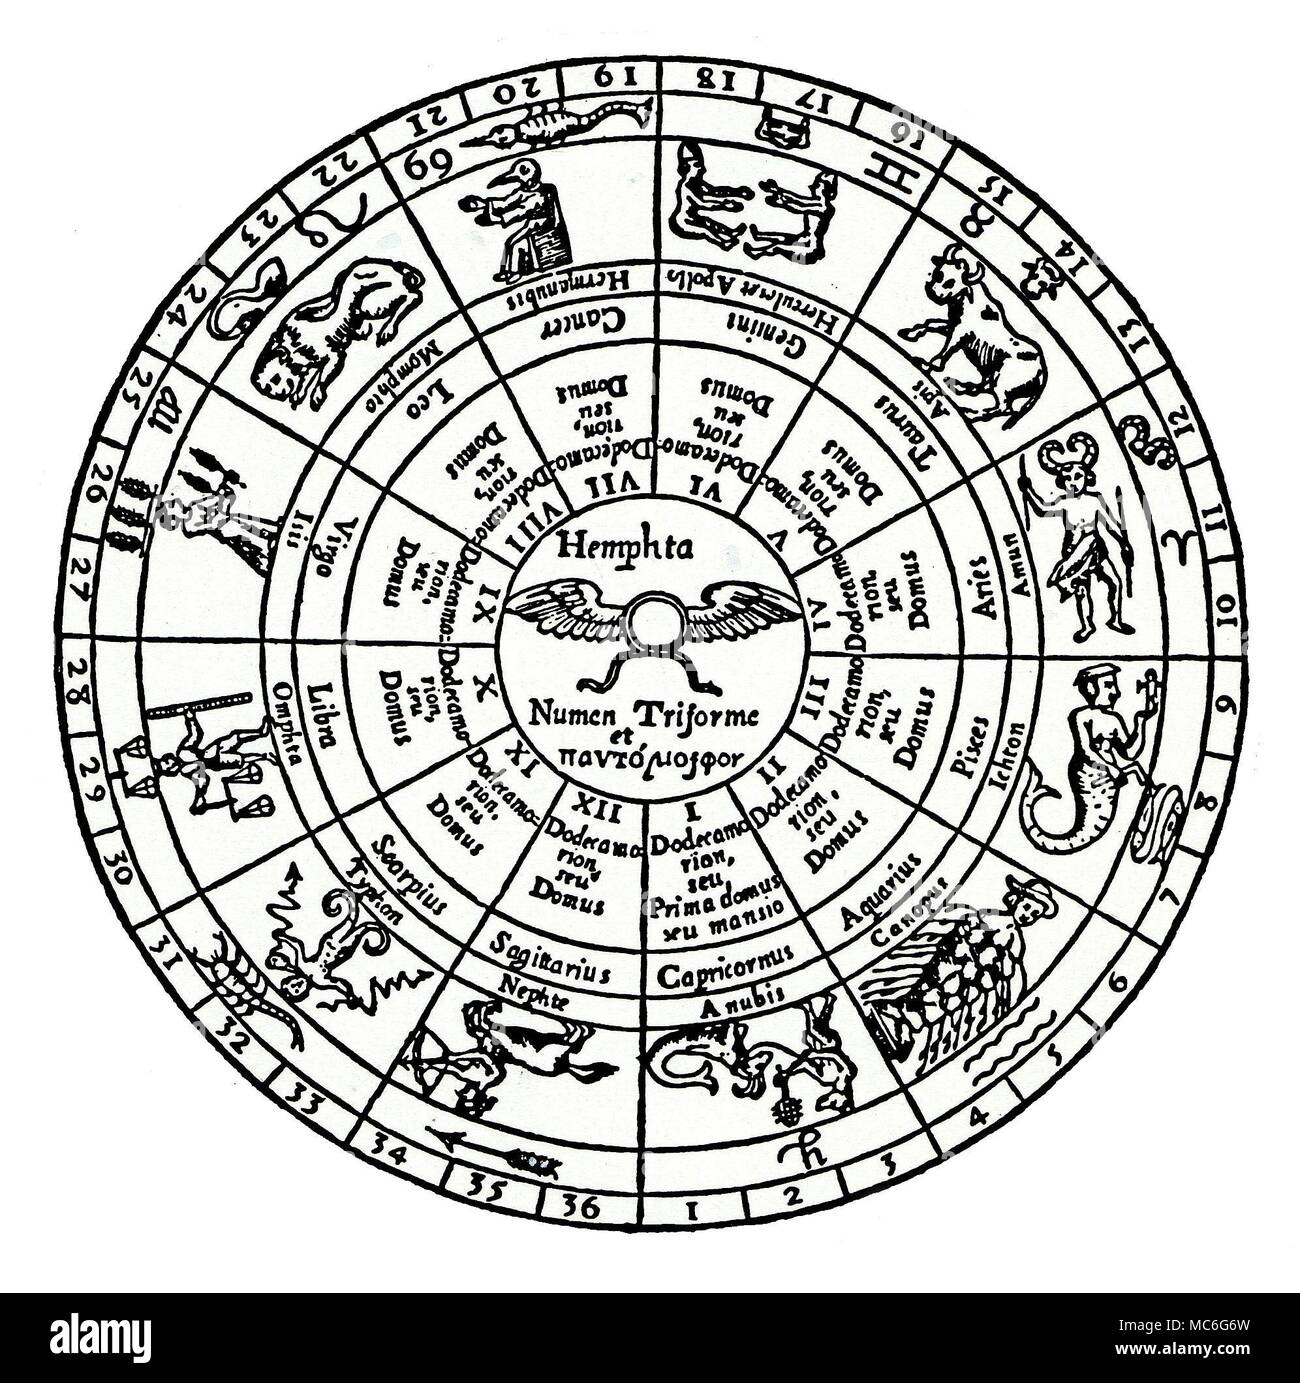 ASTROLOGY - ZODIACS - KIRCHER Kirchers composite eclectic zodiac, based on his view of the Egyptian culture and hieroglyphics. The central circle gives the winged disk, which Kircher interprets as Triform Godhead [Numen], and which he names the Hemphta. The first concentric gives the number of the house (domus), or twelfth part of the circle: the next gives the corresponding name in the Graeco-Roman tradition of the zodiac signs or constellations [thus, Aries, Taurus, Gemini, etc.]. The next concentrics offer the corresponding ancient god that (in Kircher's opinion) links with the named zo Stock Photo